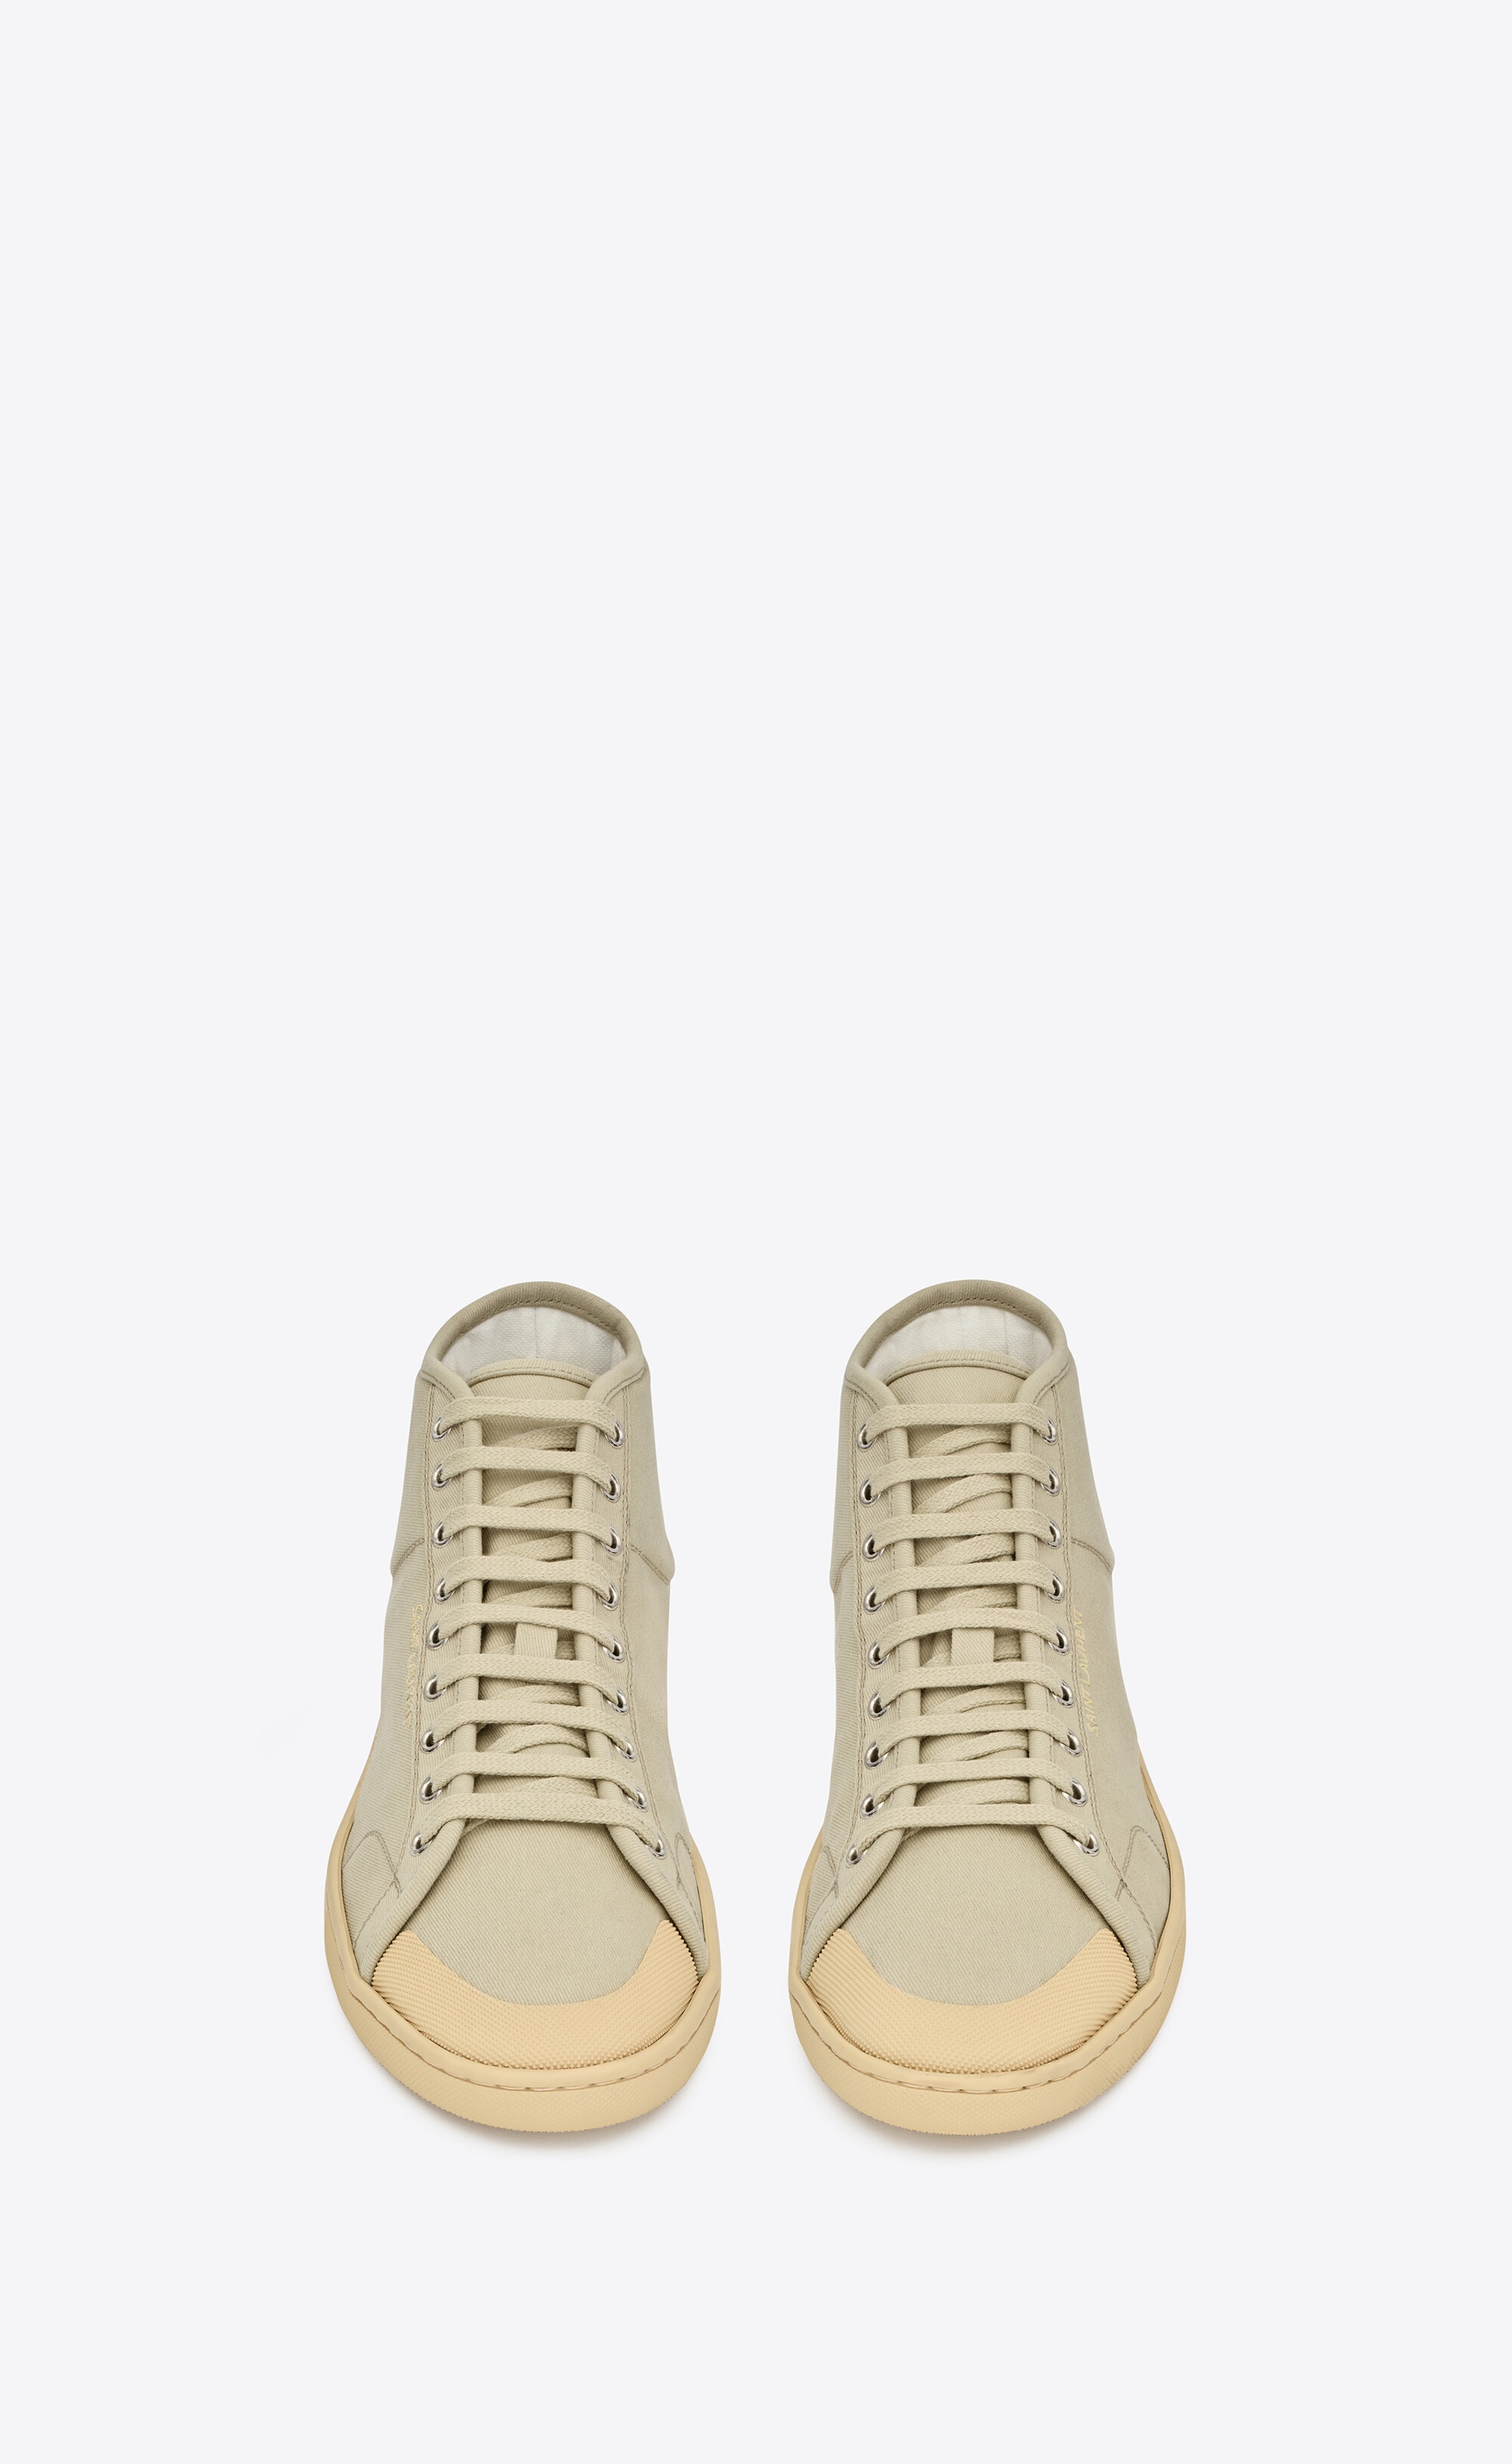 court classic sl/39 sneakers in canvas - 2